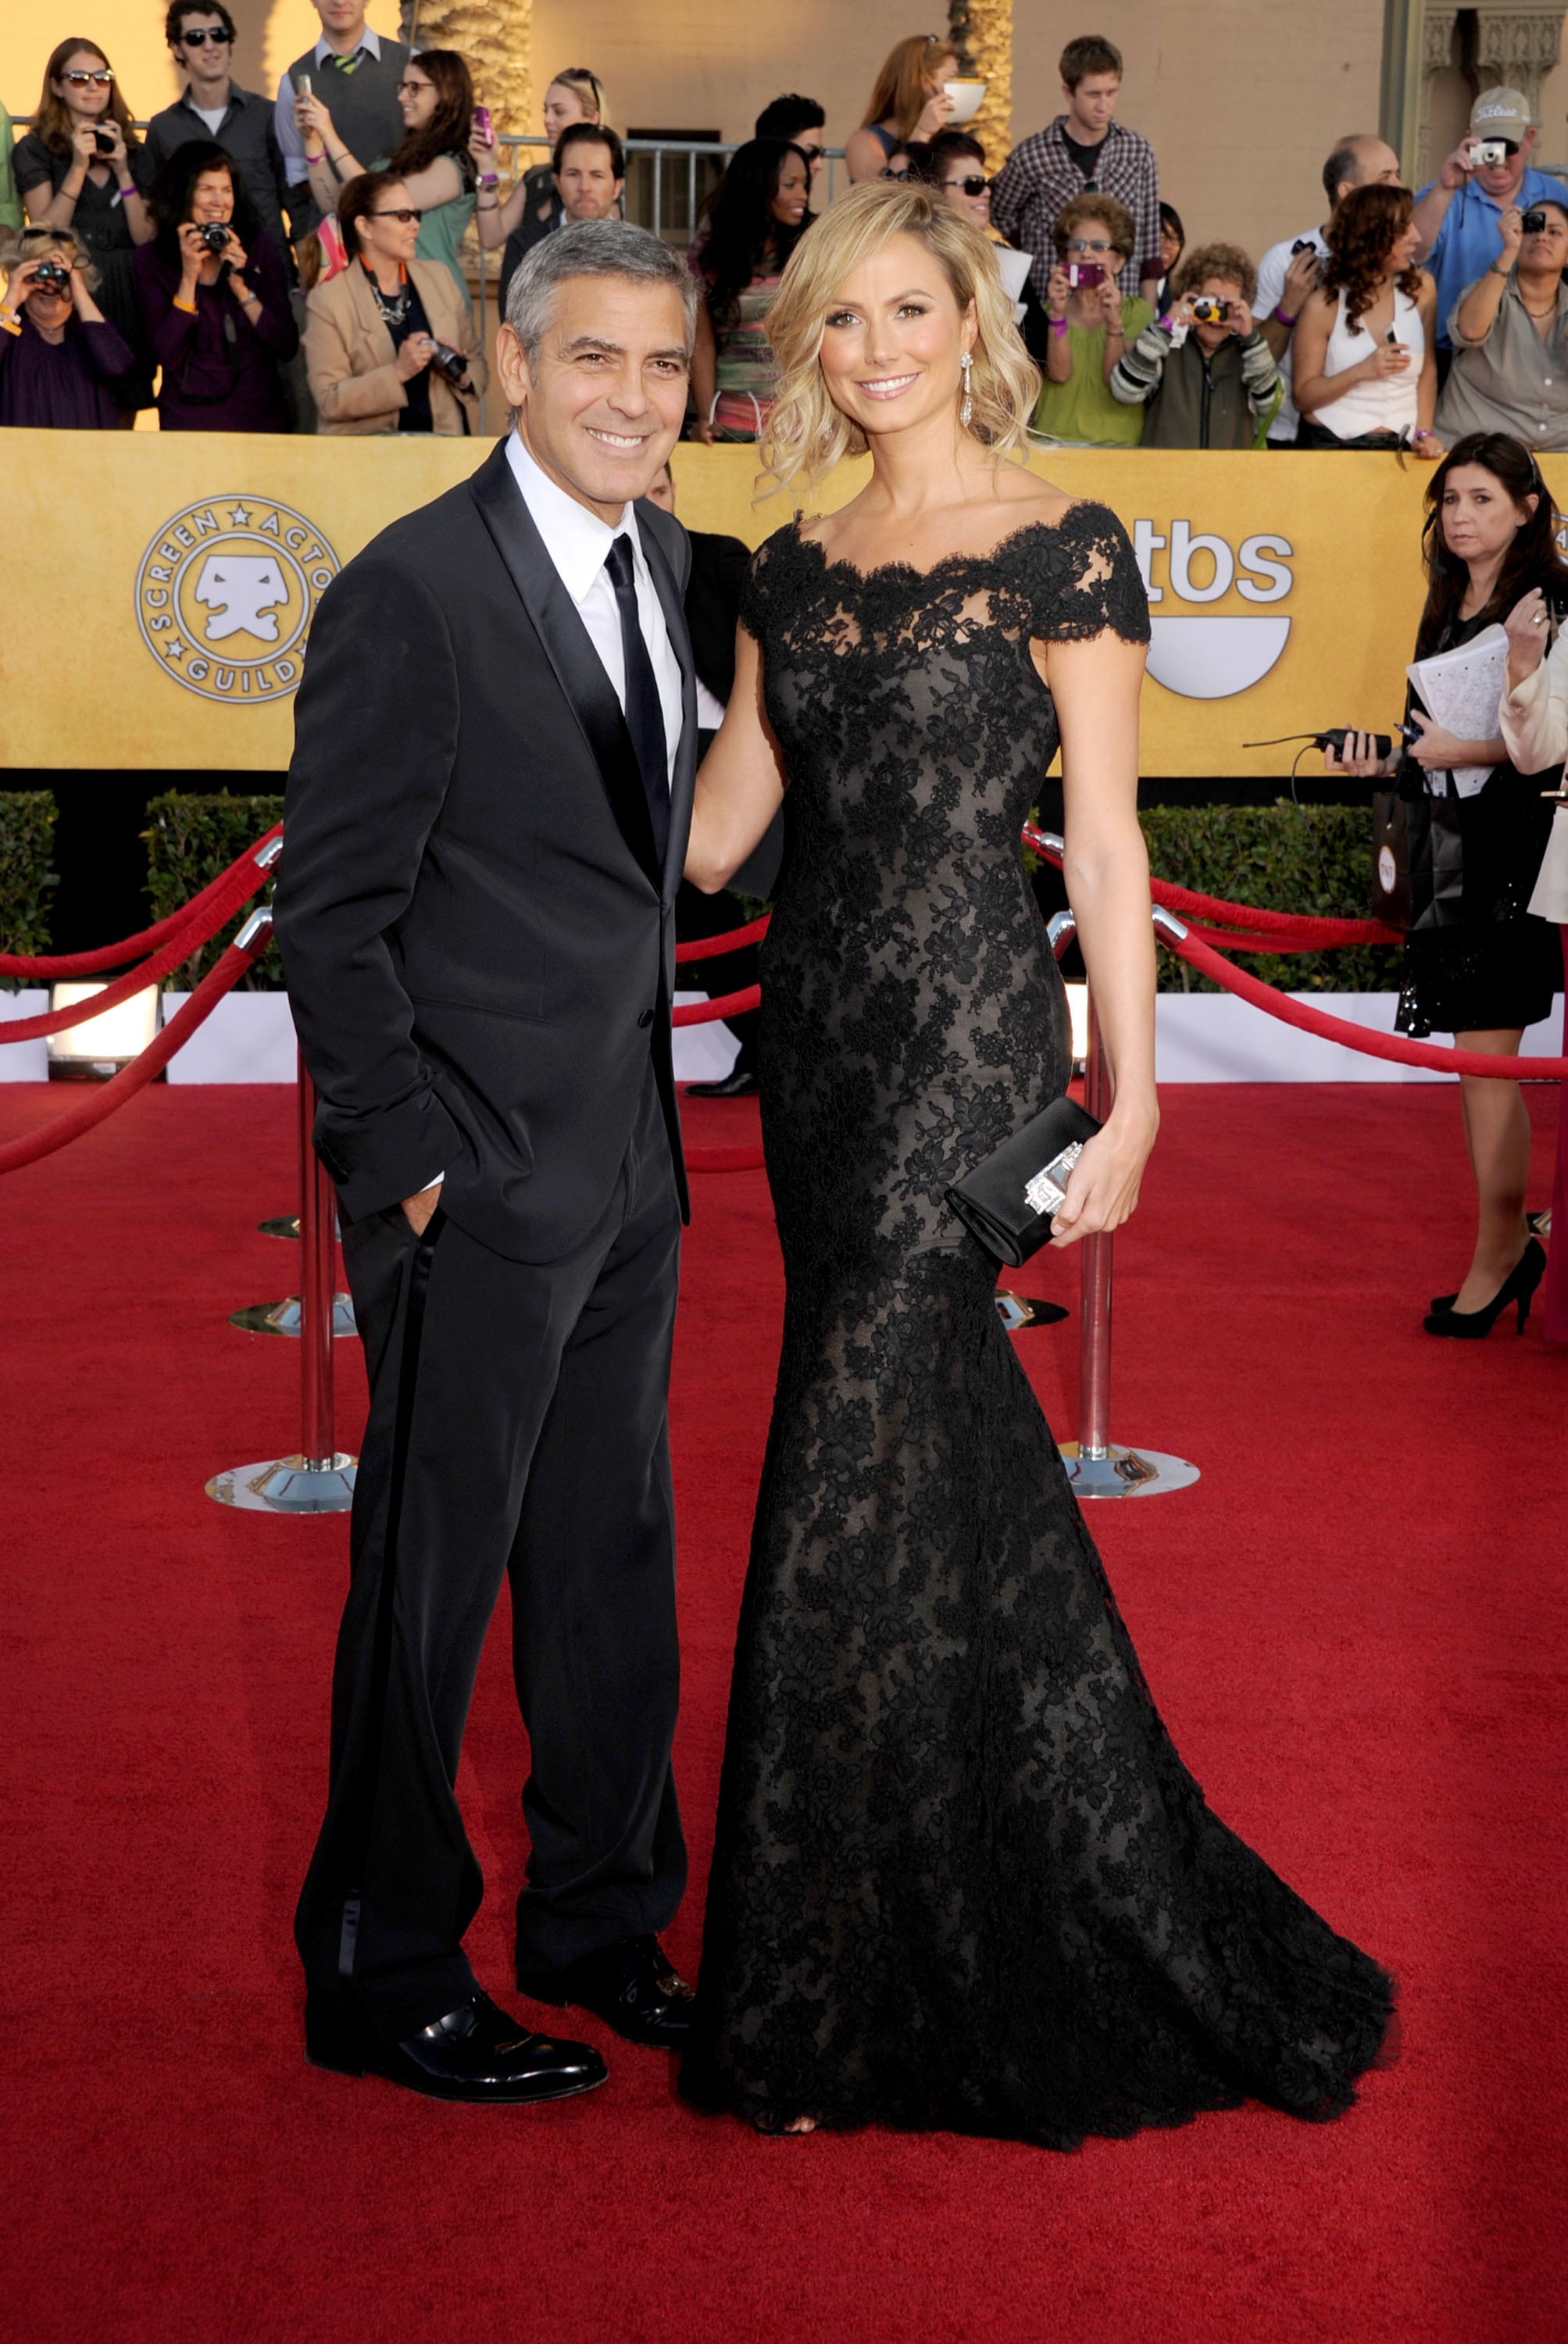 George Clooney and Stacey Keibler at the SAG Awards